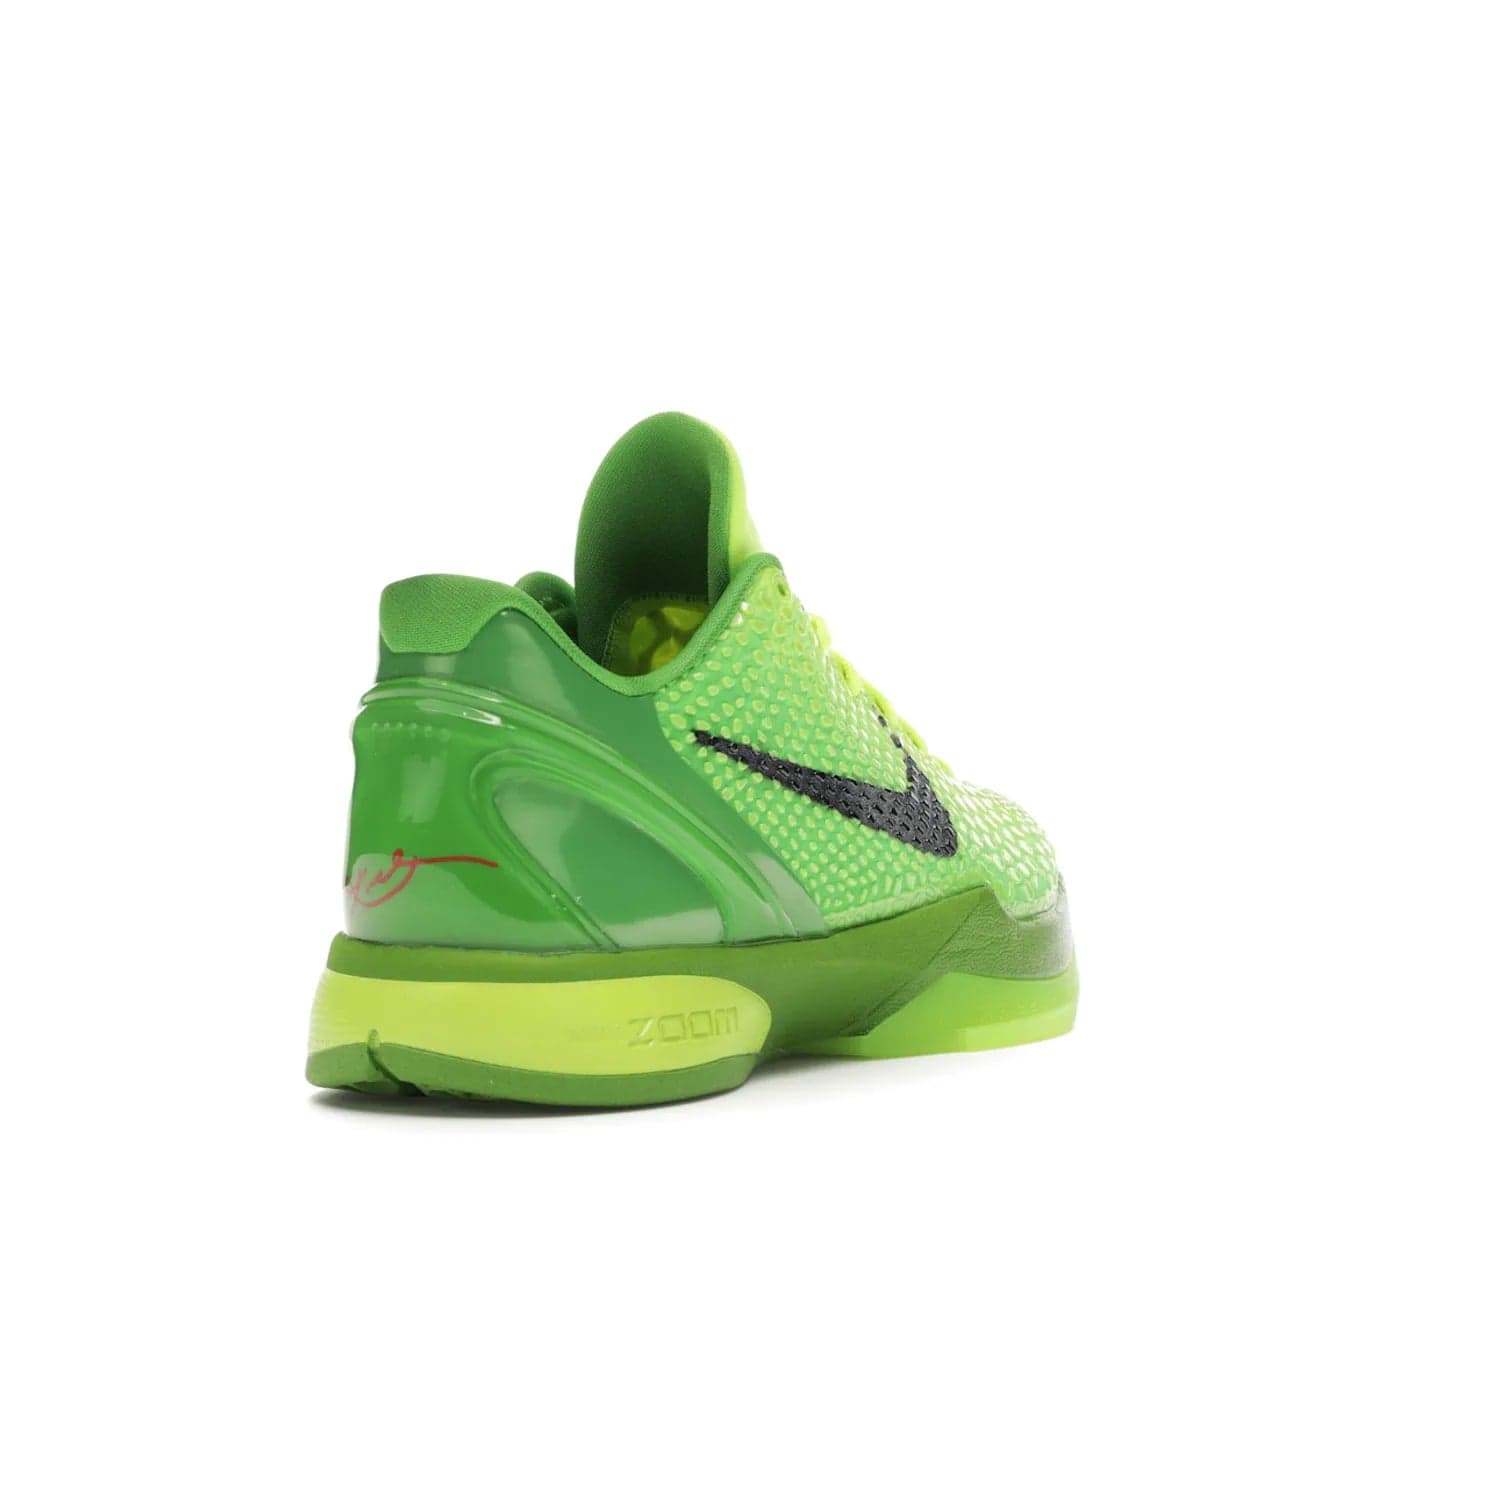 Nike Kobe 6 Protro Grinch (2020) - Image 31 - Only at www.BallersClubKickz.com - #
The Nike Kobe 6 Protro Grinch updates the iconic 2011 design with modern tech like a Zoom Air cushioning system, scaled-down traction, and updated silhouette. Experience the textured Green Apple and Volt upper plus bright red and green accents for $180.